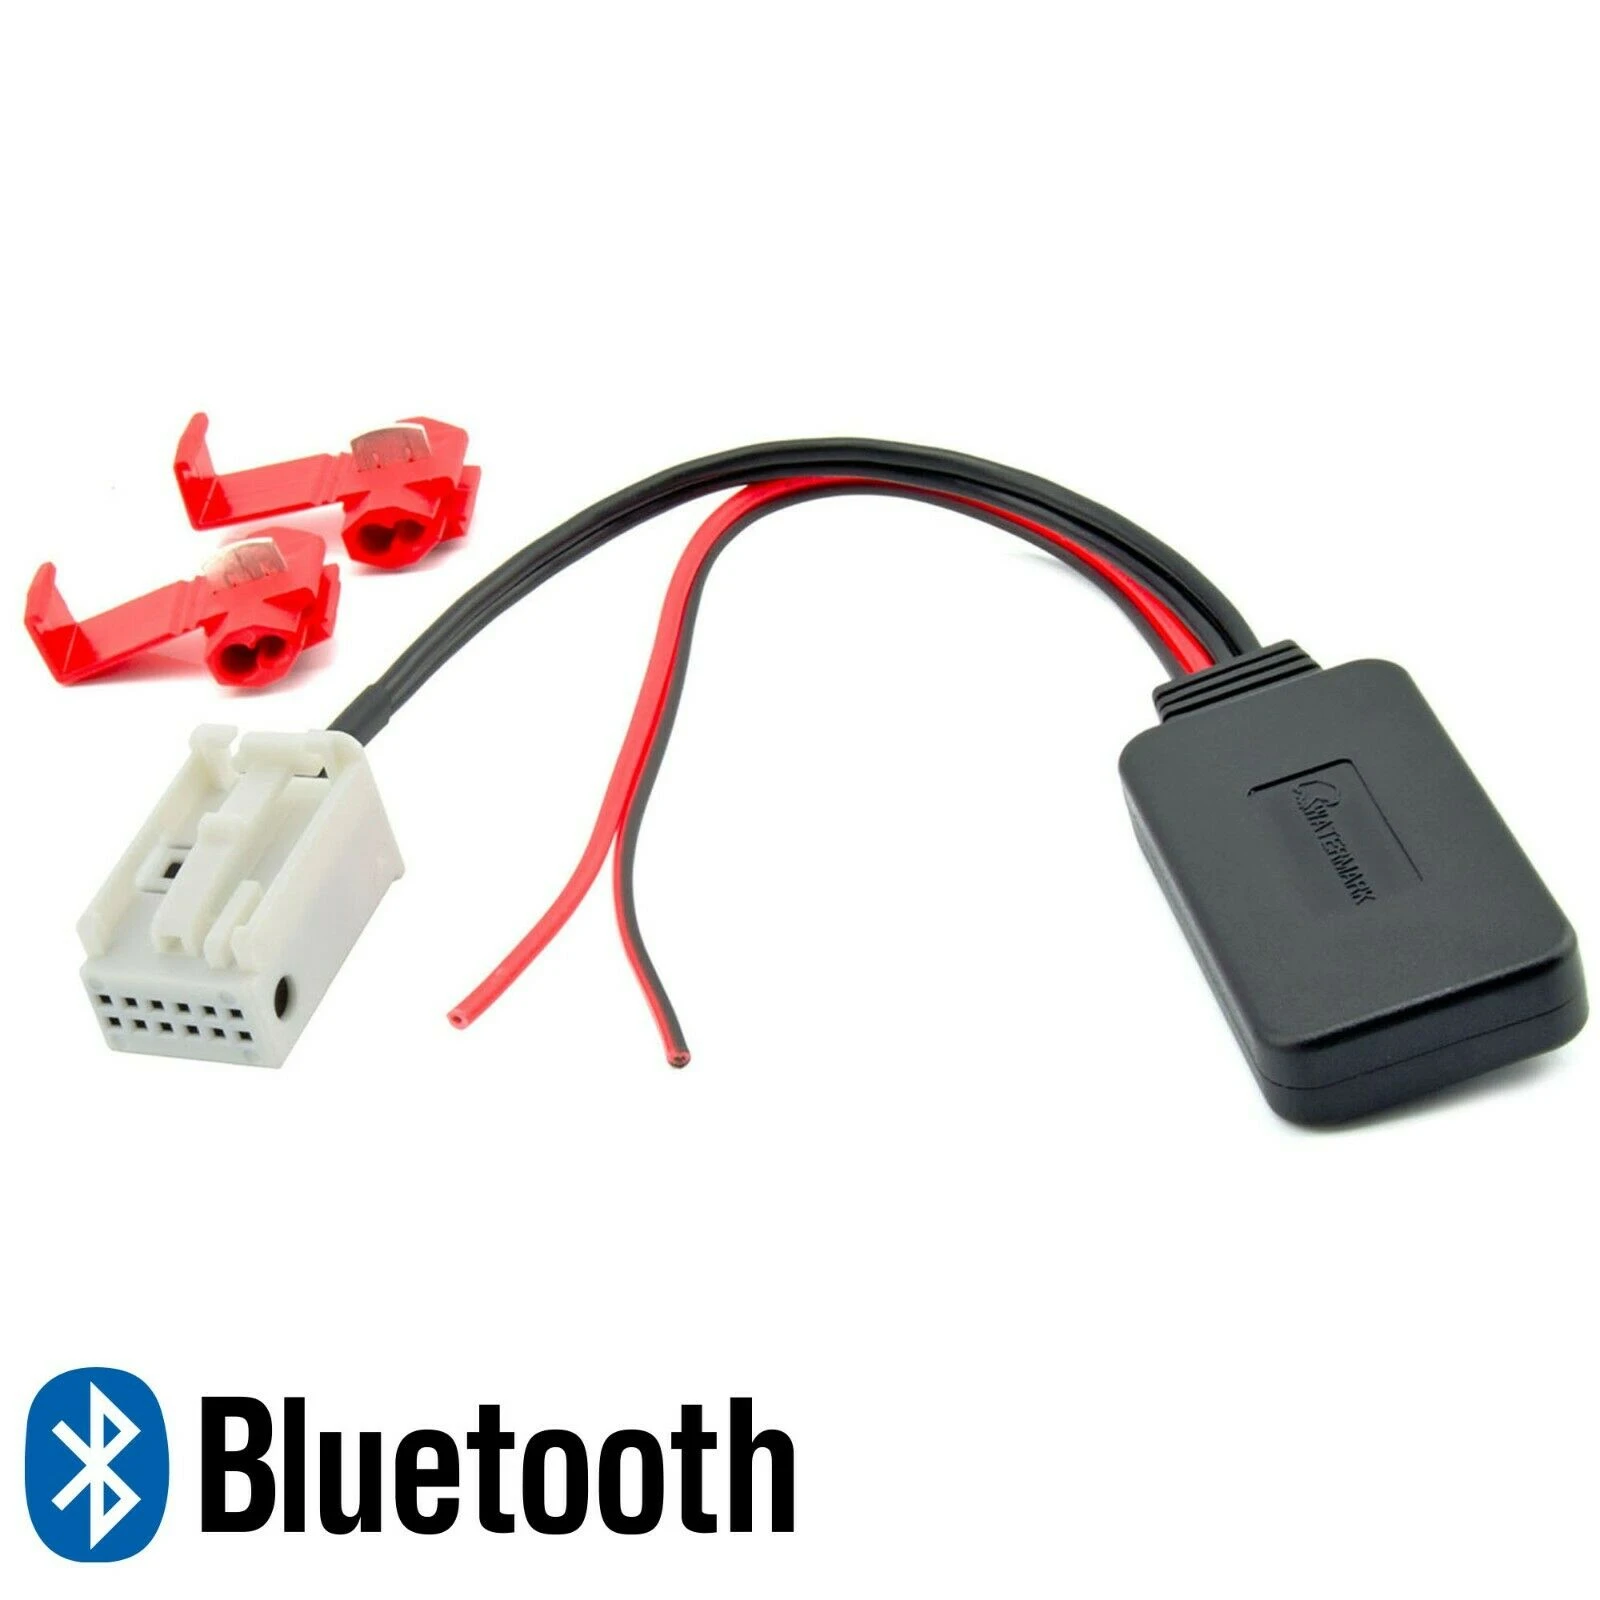 Bluetooth Aux Audio Music Adapter Connector For Citroen C2 C3 C4 C5 Ds3 Ds4 Peugeot  207 307 407 Blaupunkt/vdo/bosch Rd4 Cd Radio - Cables, Adapters & Sockets -  AliExpress